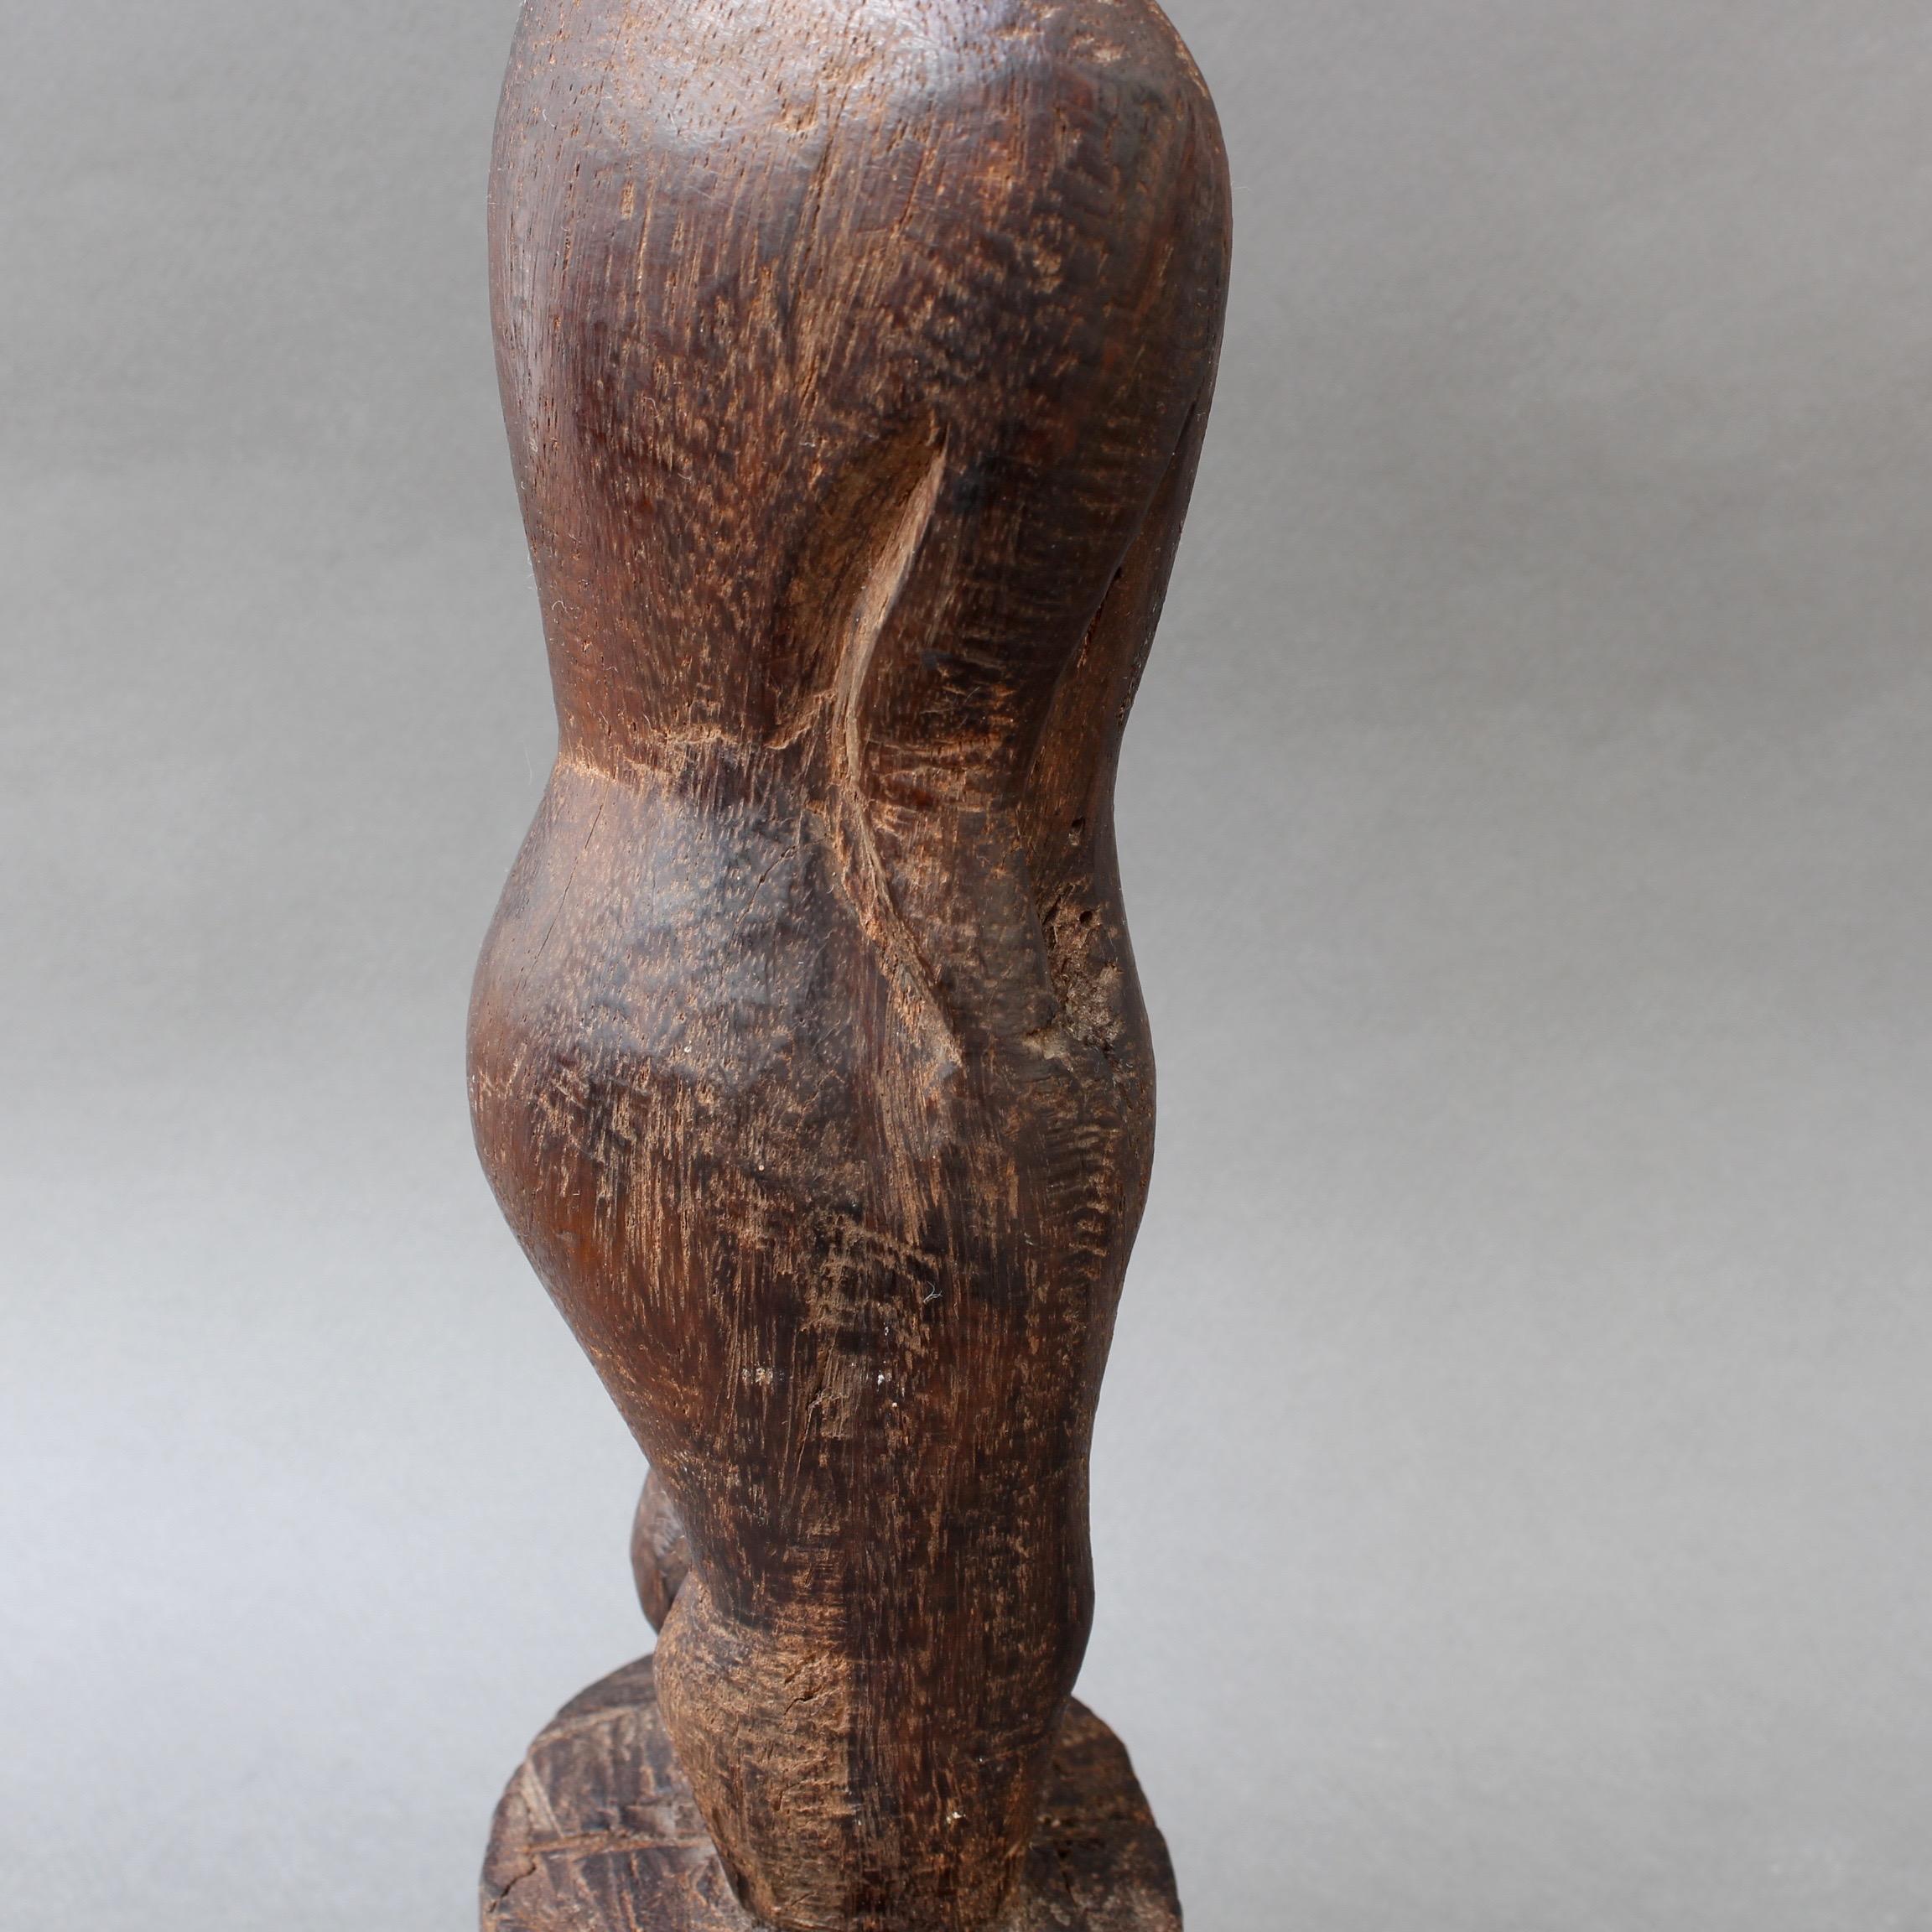 Wooden Carving or Sculpture of Standing Ancestral Figure from Timor, Indonesia 7